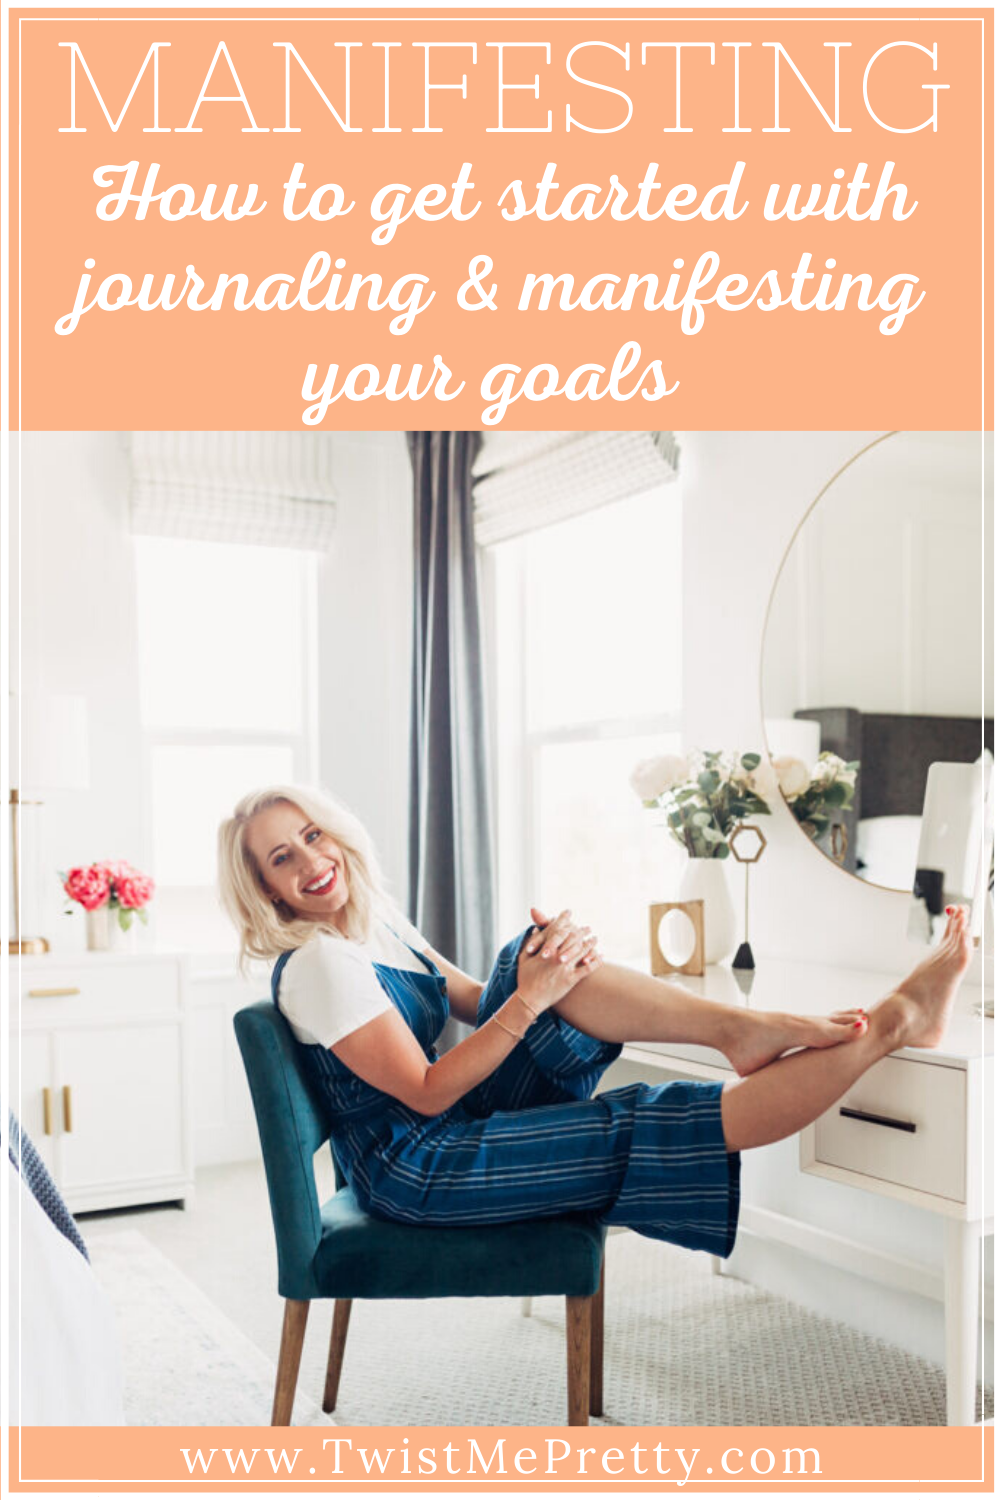 Manifesting- How to get started with journaling and manifesting your goals. www.twistmepretty.com